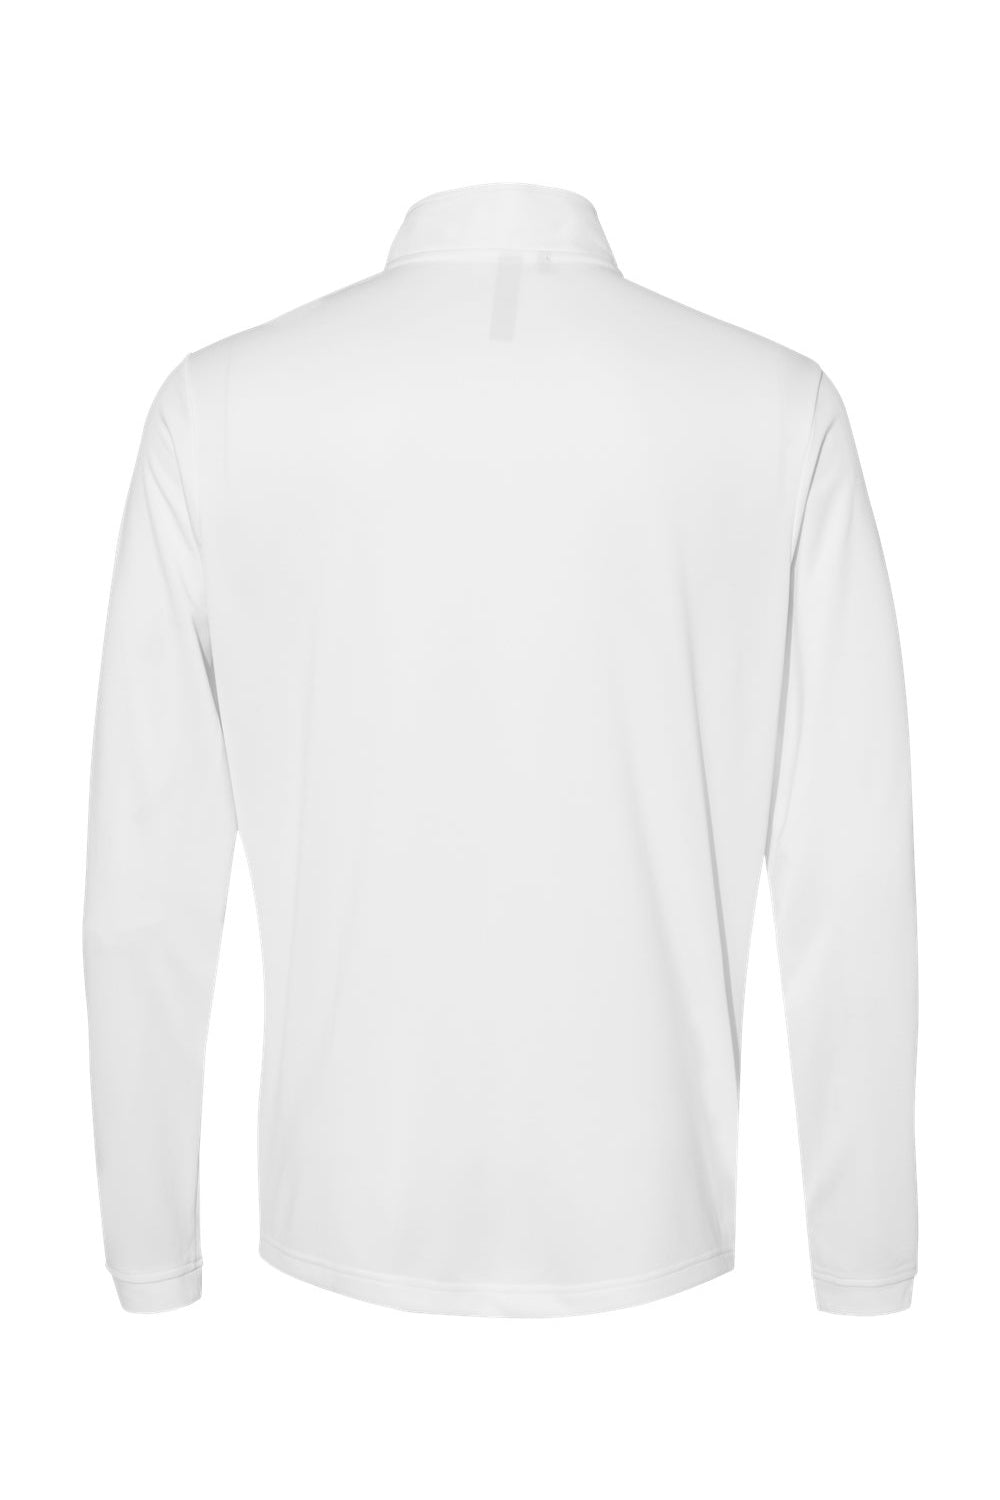 Adidas A401 Mens 1/4 Zip Pullover White Flat Back